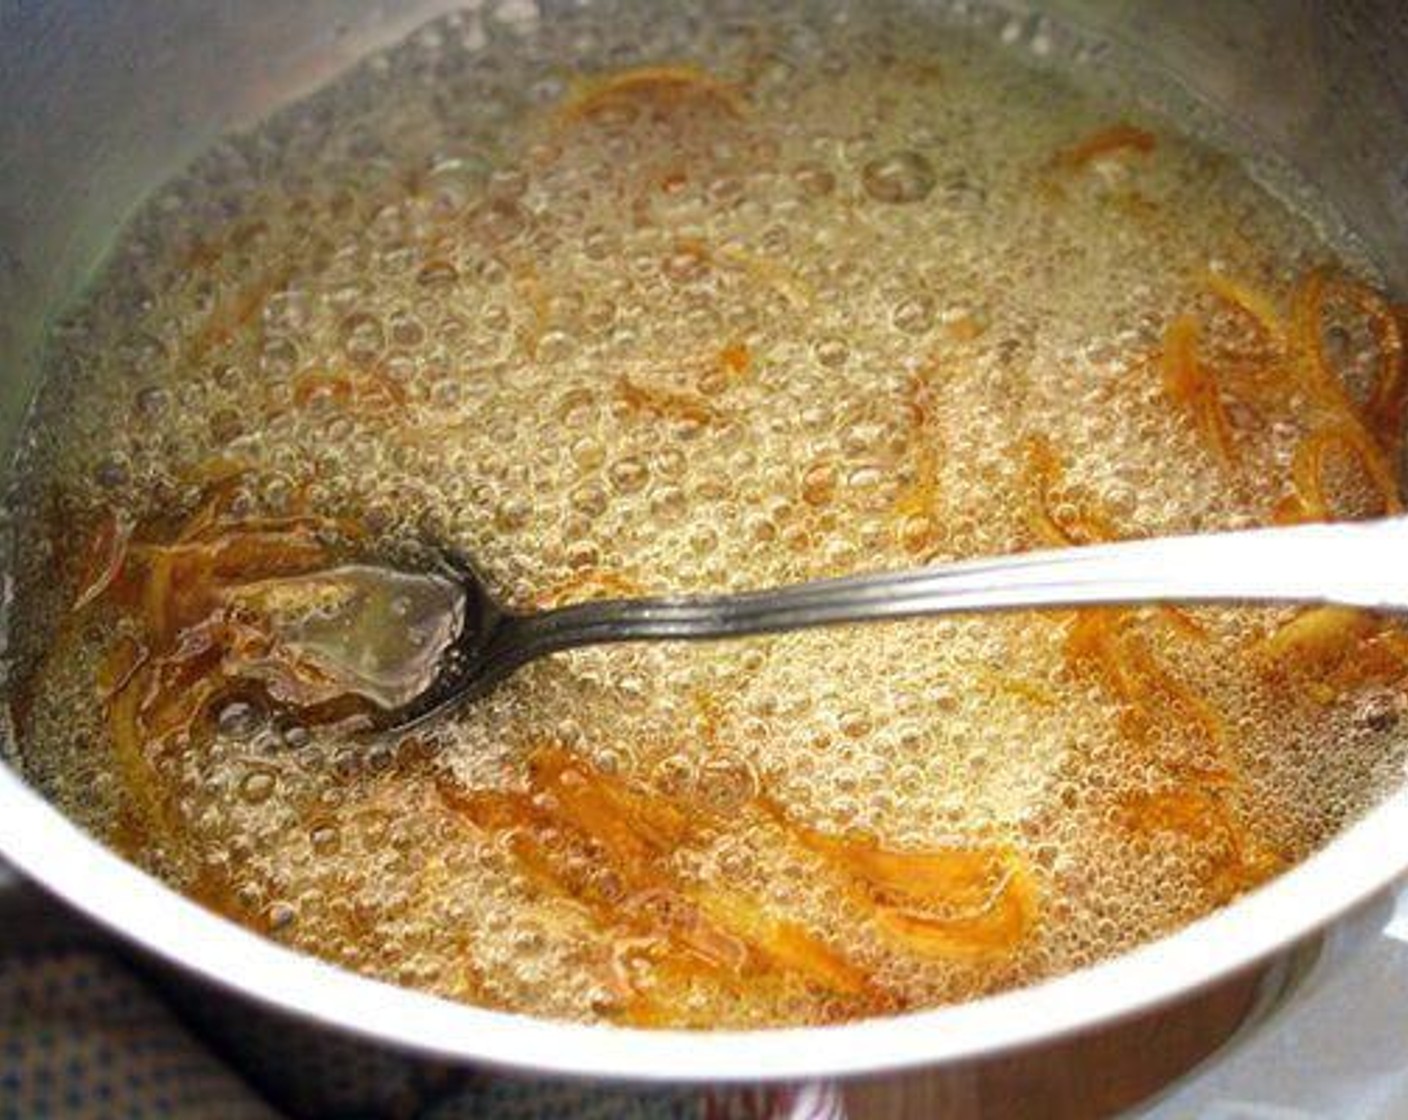 step 5 In the same pan, dissolve Granulated Sugar (1 cup) in Water (1/2 cup). Bring to a boil, then add the orange peel. Cook, stirring frequently, for 10 minutes.